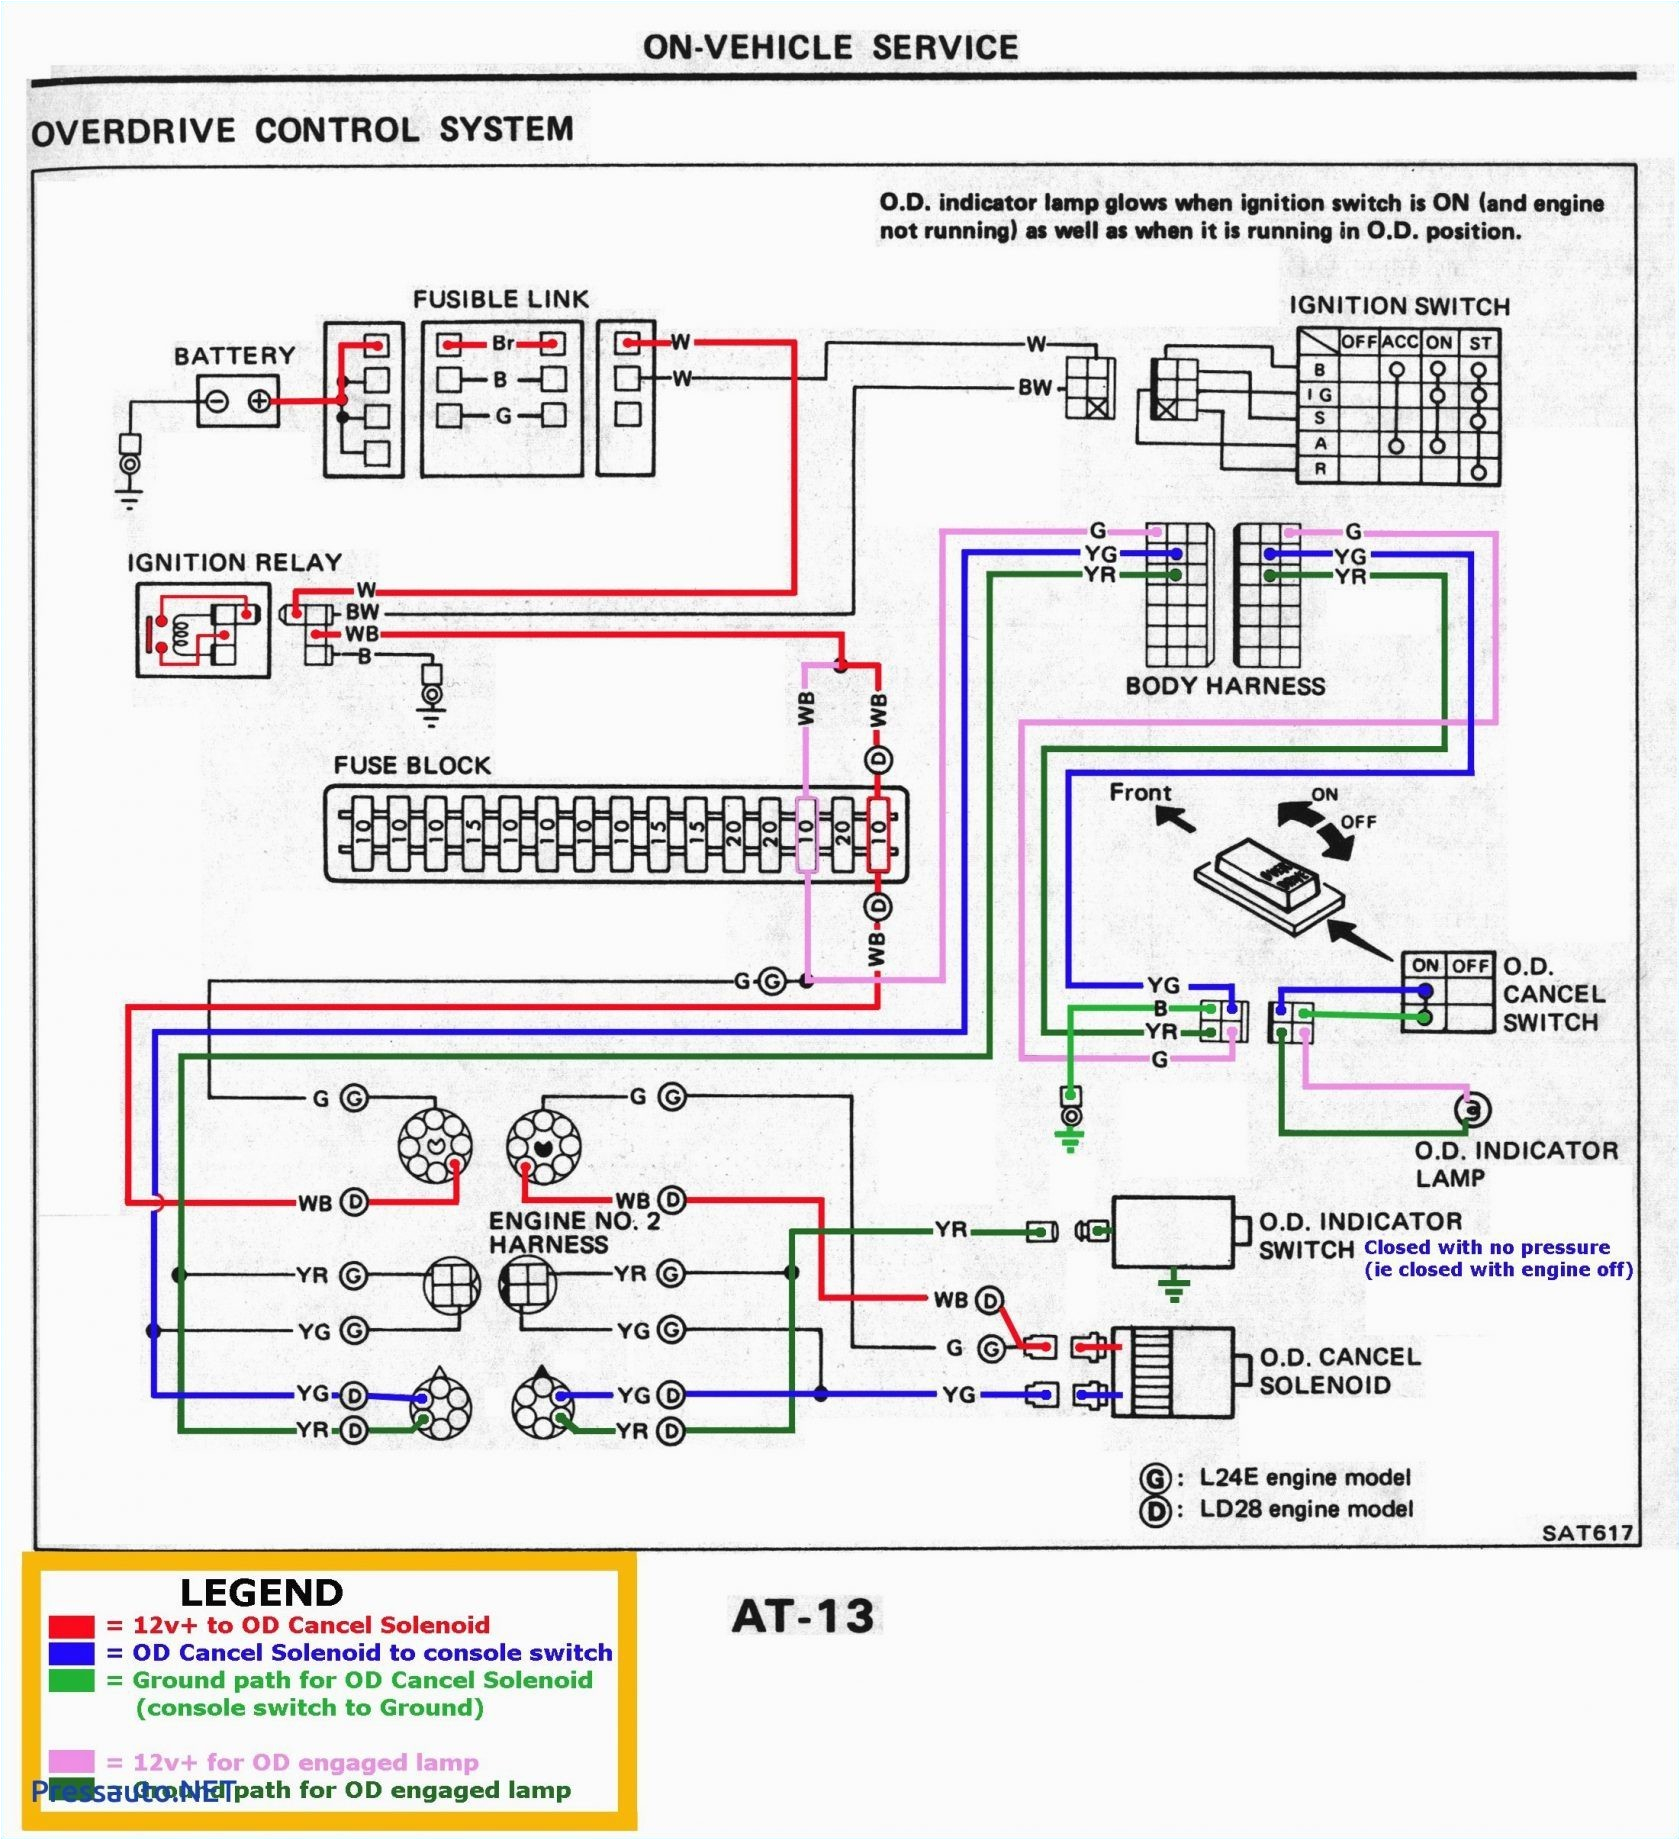 figure 15 air conditioner electrical schematic diagram wiring wiring diagram figure wiring diagram figure